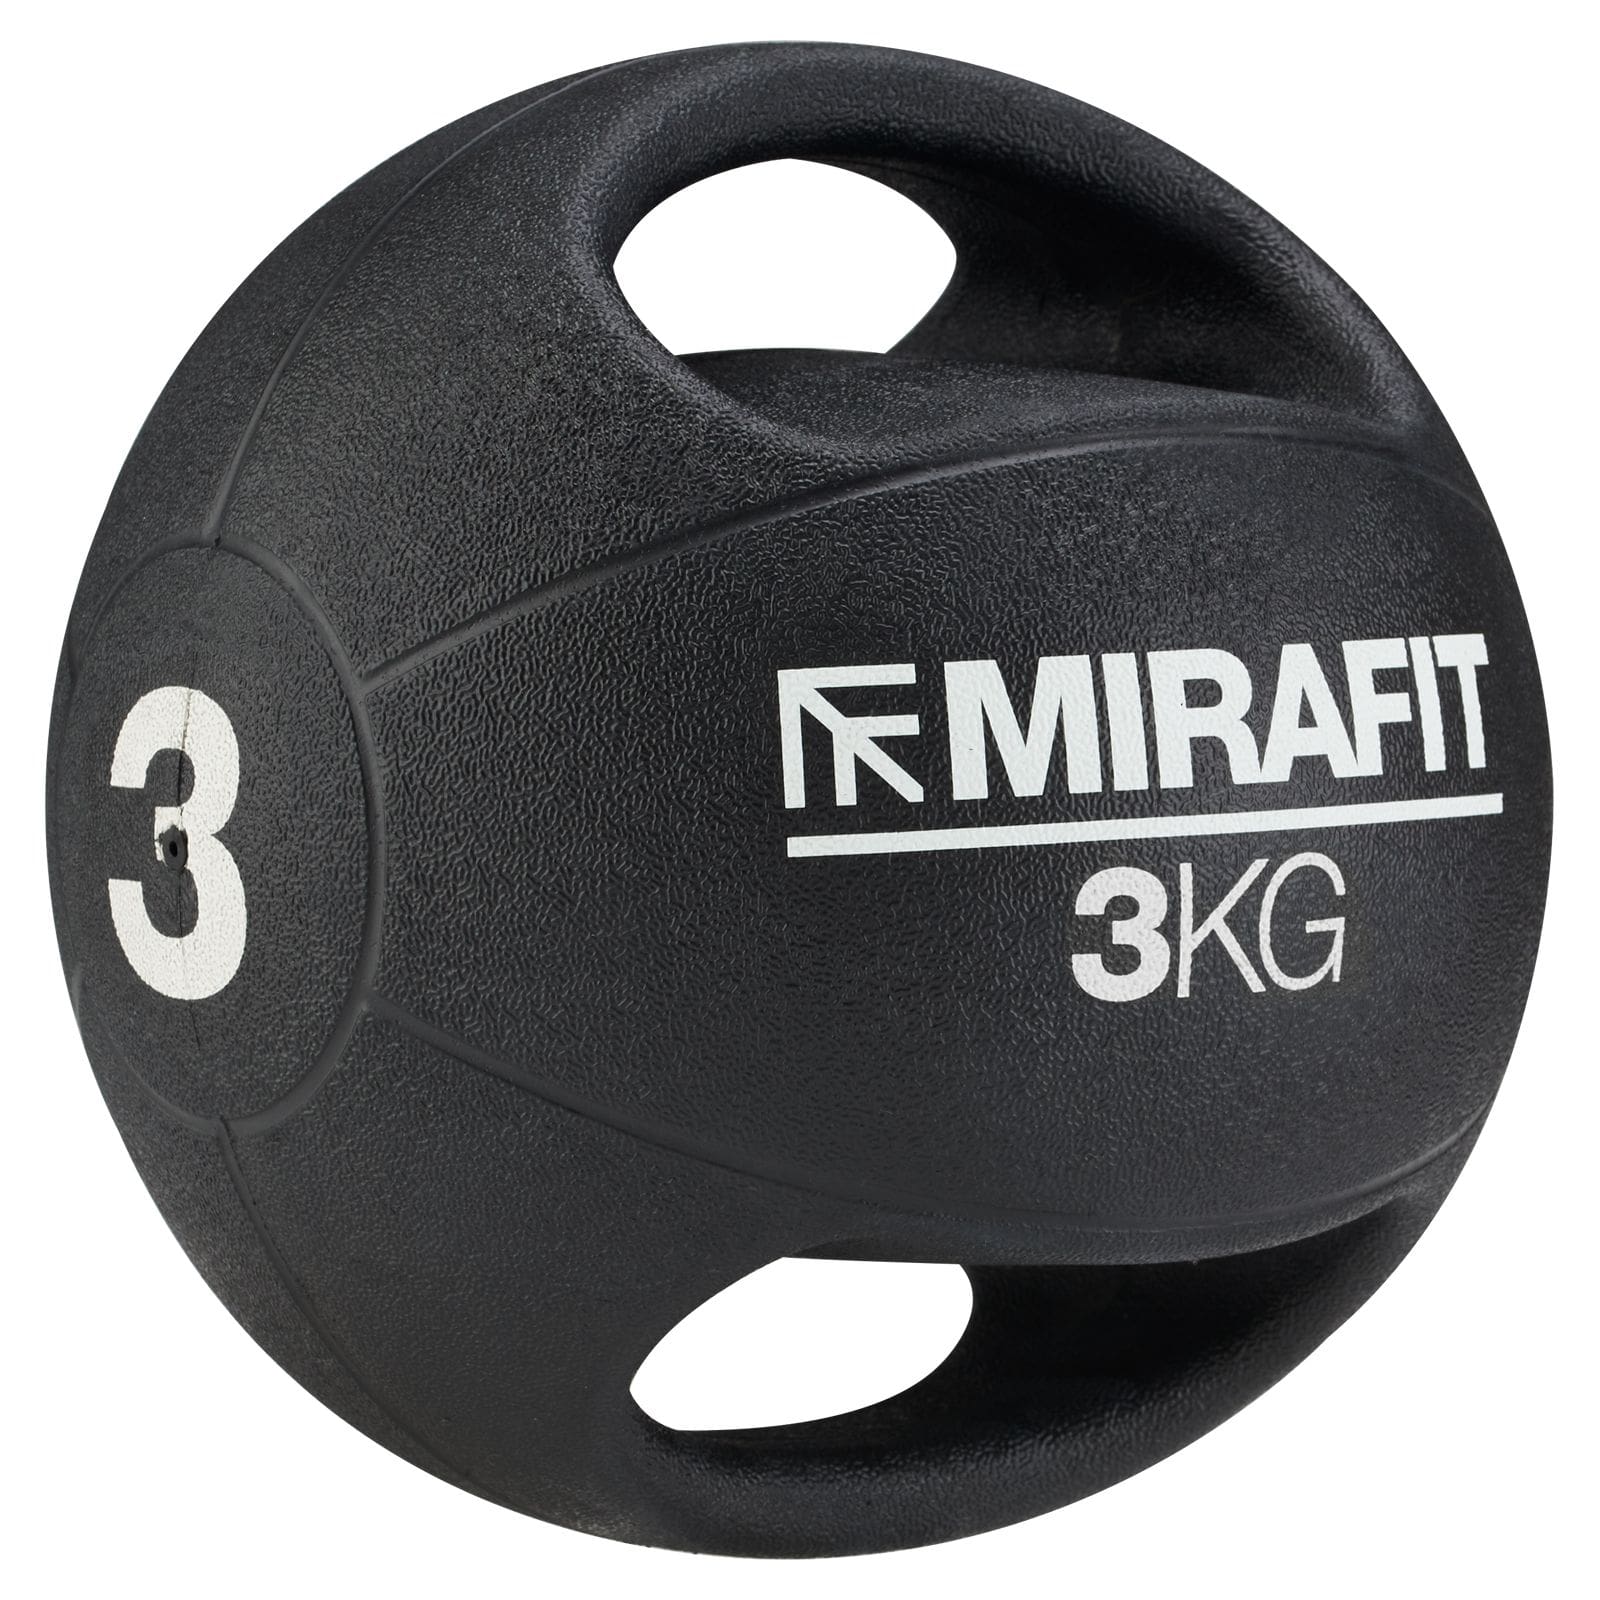 Weights of the Mirafit medicine ball with handles 3kg UK